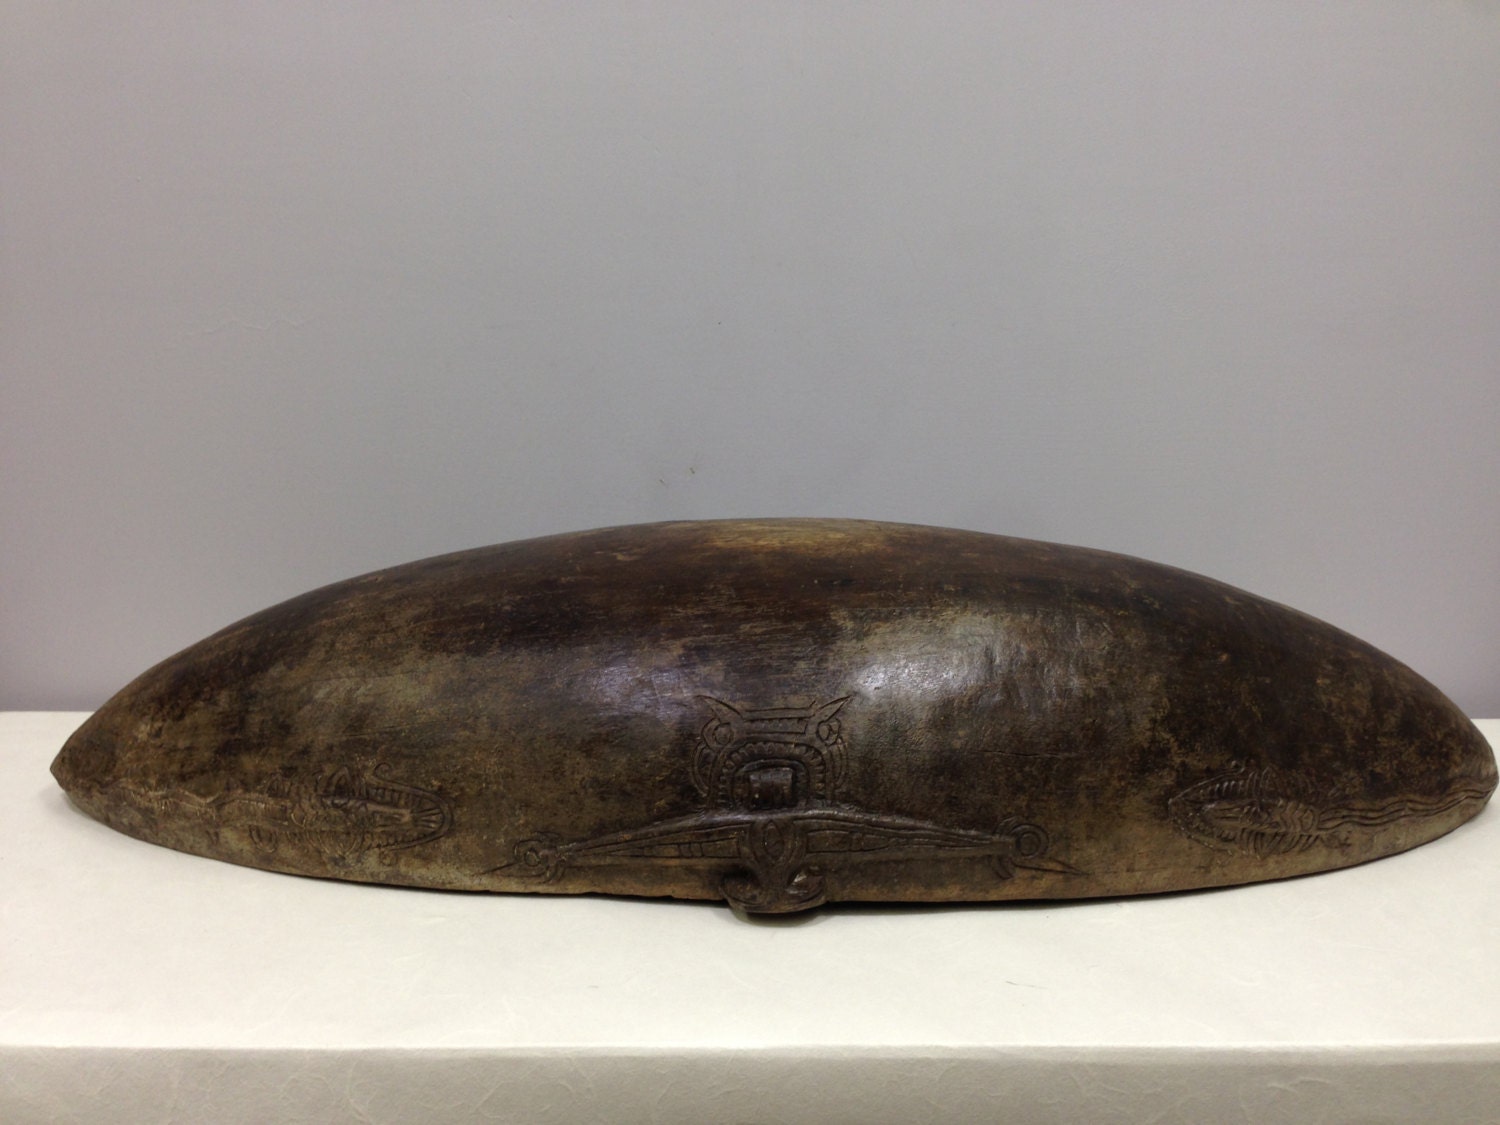 Papua New Guinea Bowl Siassi Carved Wood Ceremonial Feasting Bowl 34